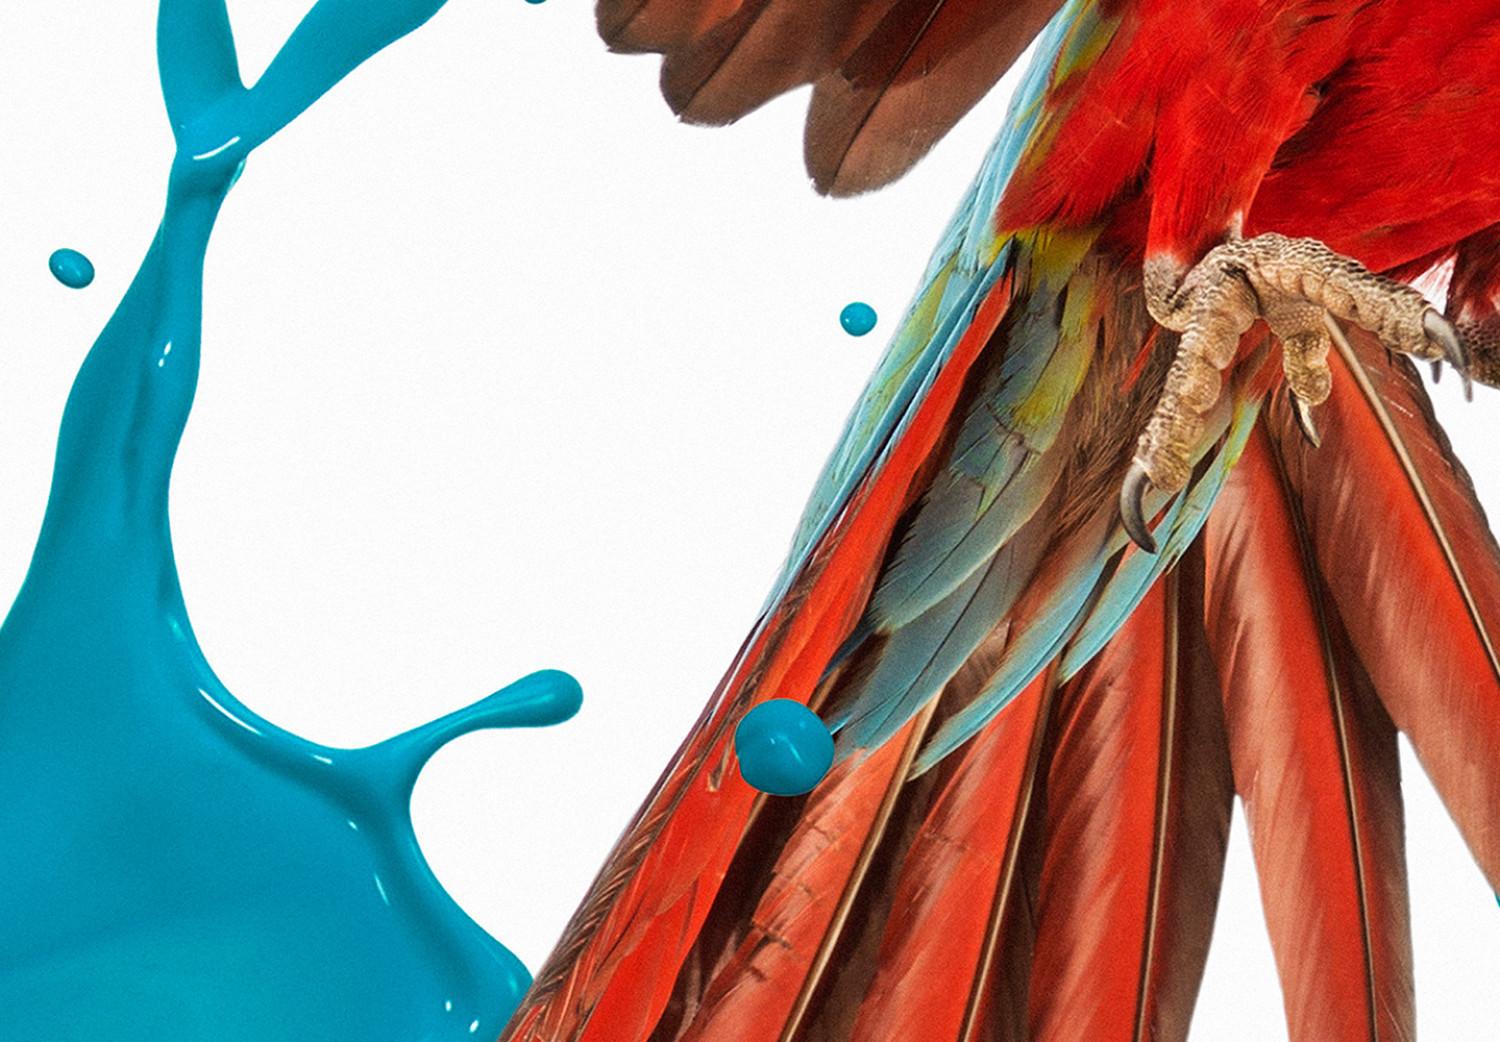 Poster Parrot in Flight - colorful tropical bird and blue paint splatter